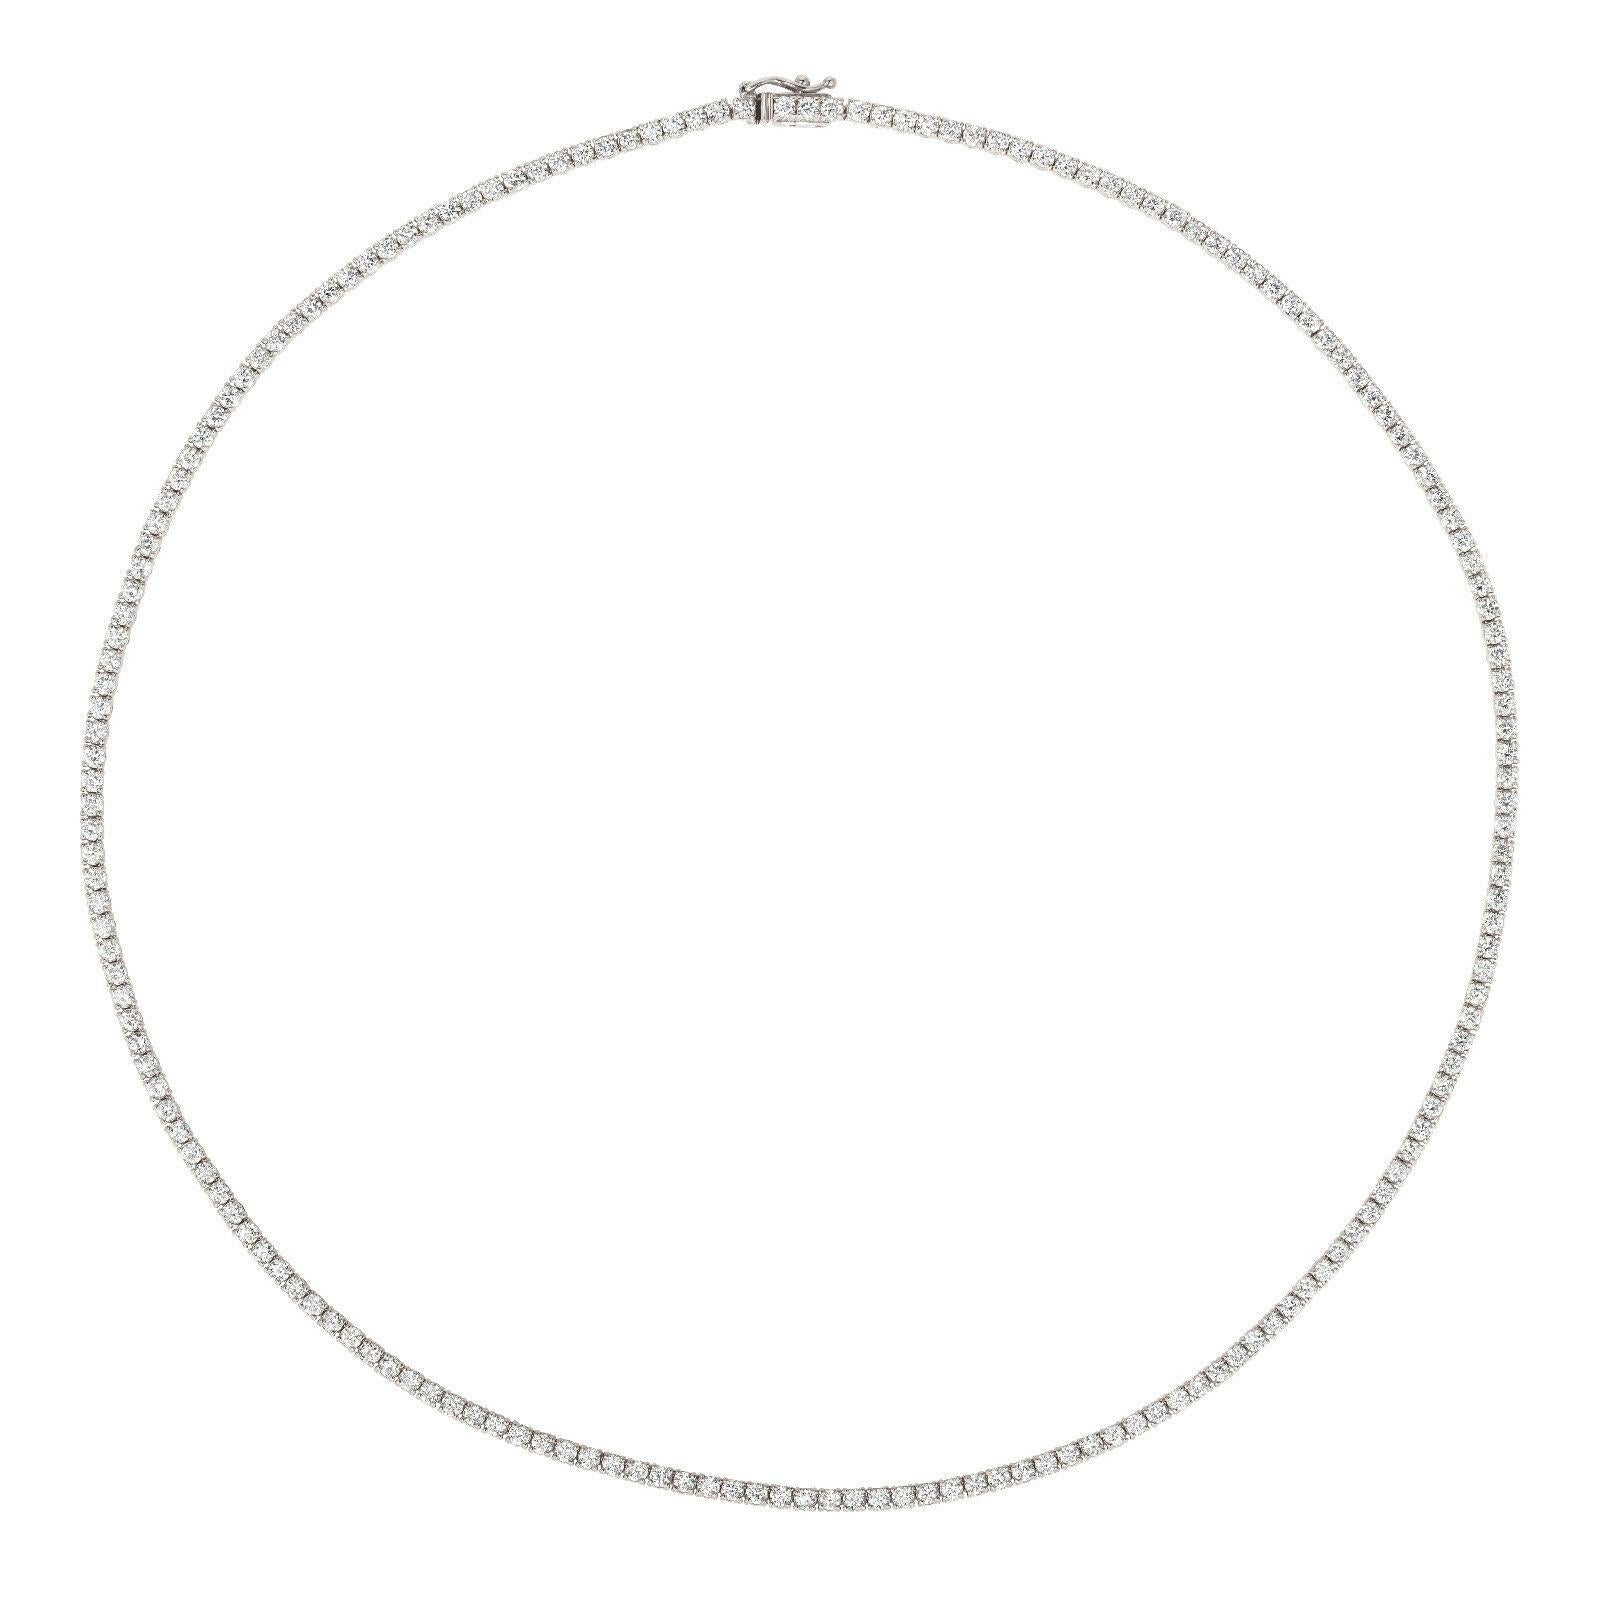 4.00 Carat Diamond Tennis Necklace G SI 14K White Gold 16 inches

100% Natural Diamonds, Not Enhanced in any way Round Cut Diamond  Necklace  
4.00CT
G-H 
SI  
14K White Gold, Pave style 
16 inches in length, 1/16 inch in width
207